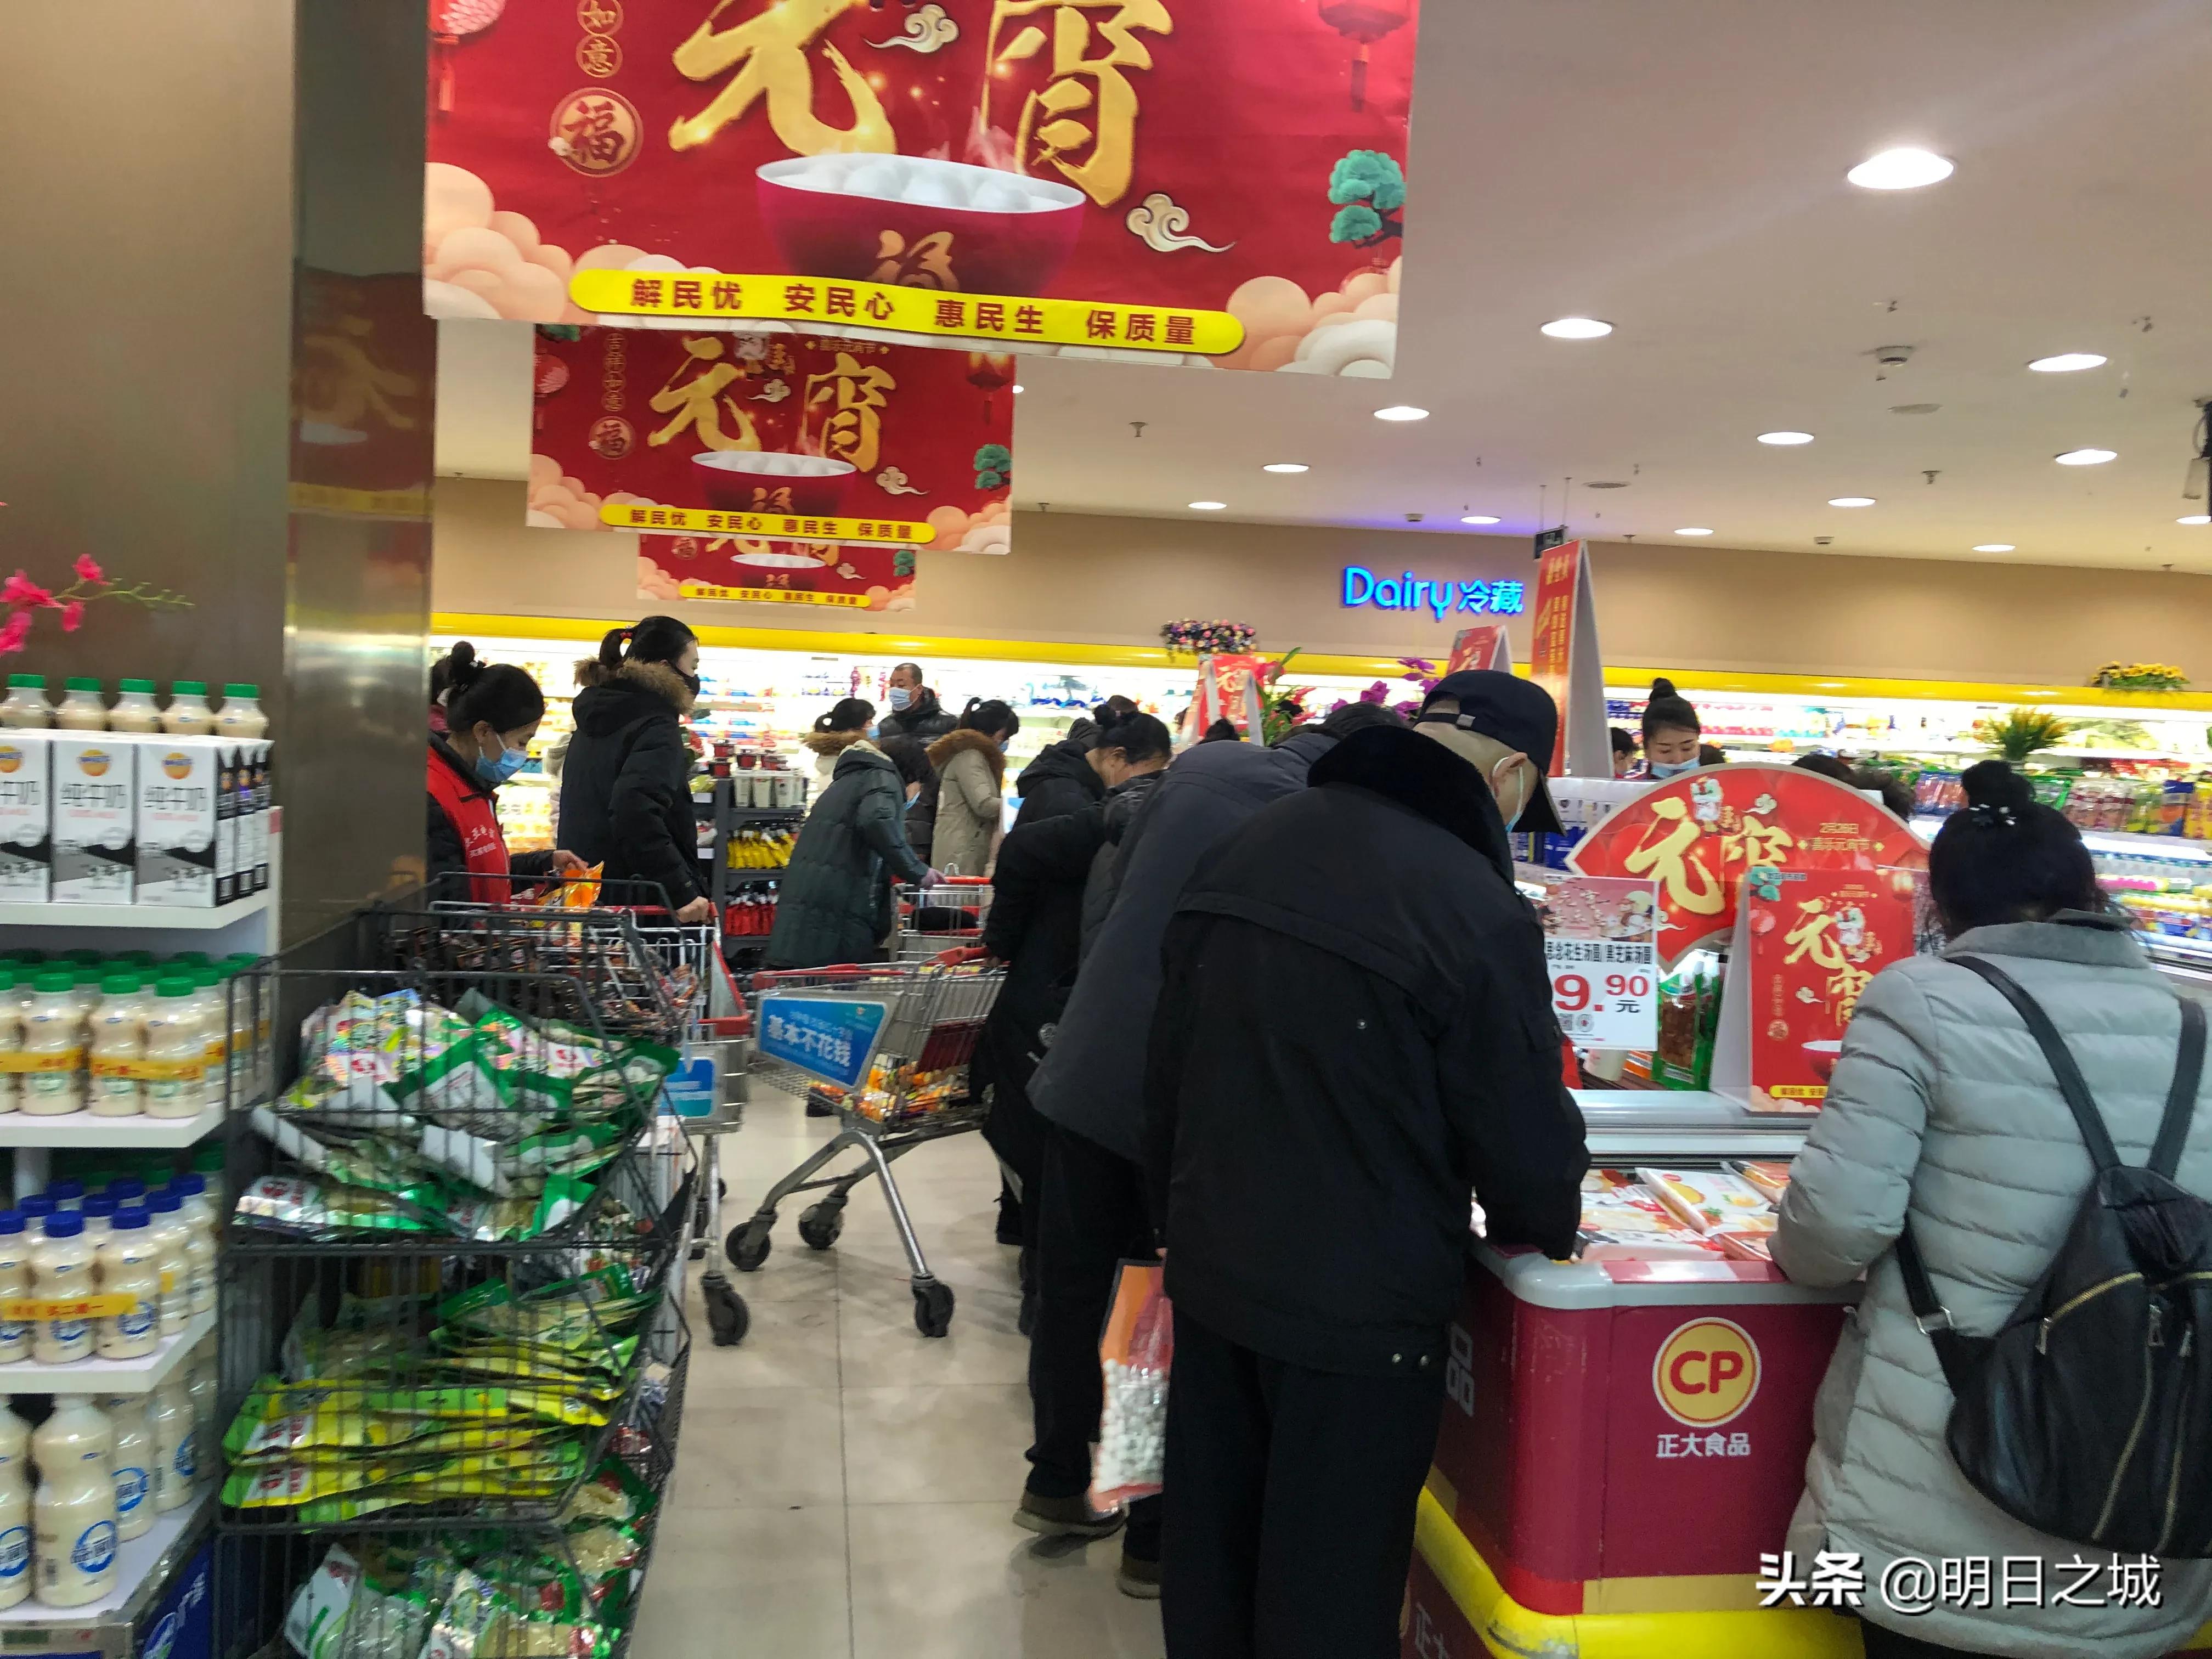 Eve of festival of lanterns, this supermarket stuffed dumplings masse of glutinous rice flour served in soup sells Changchun mad! 